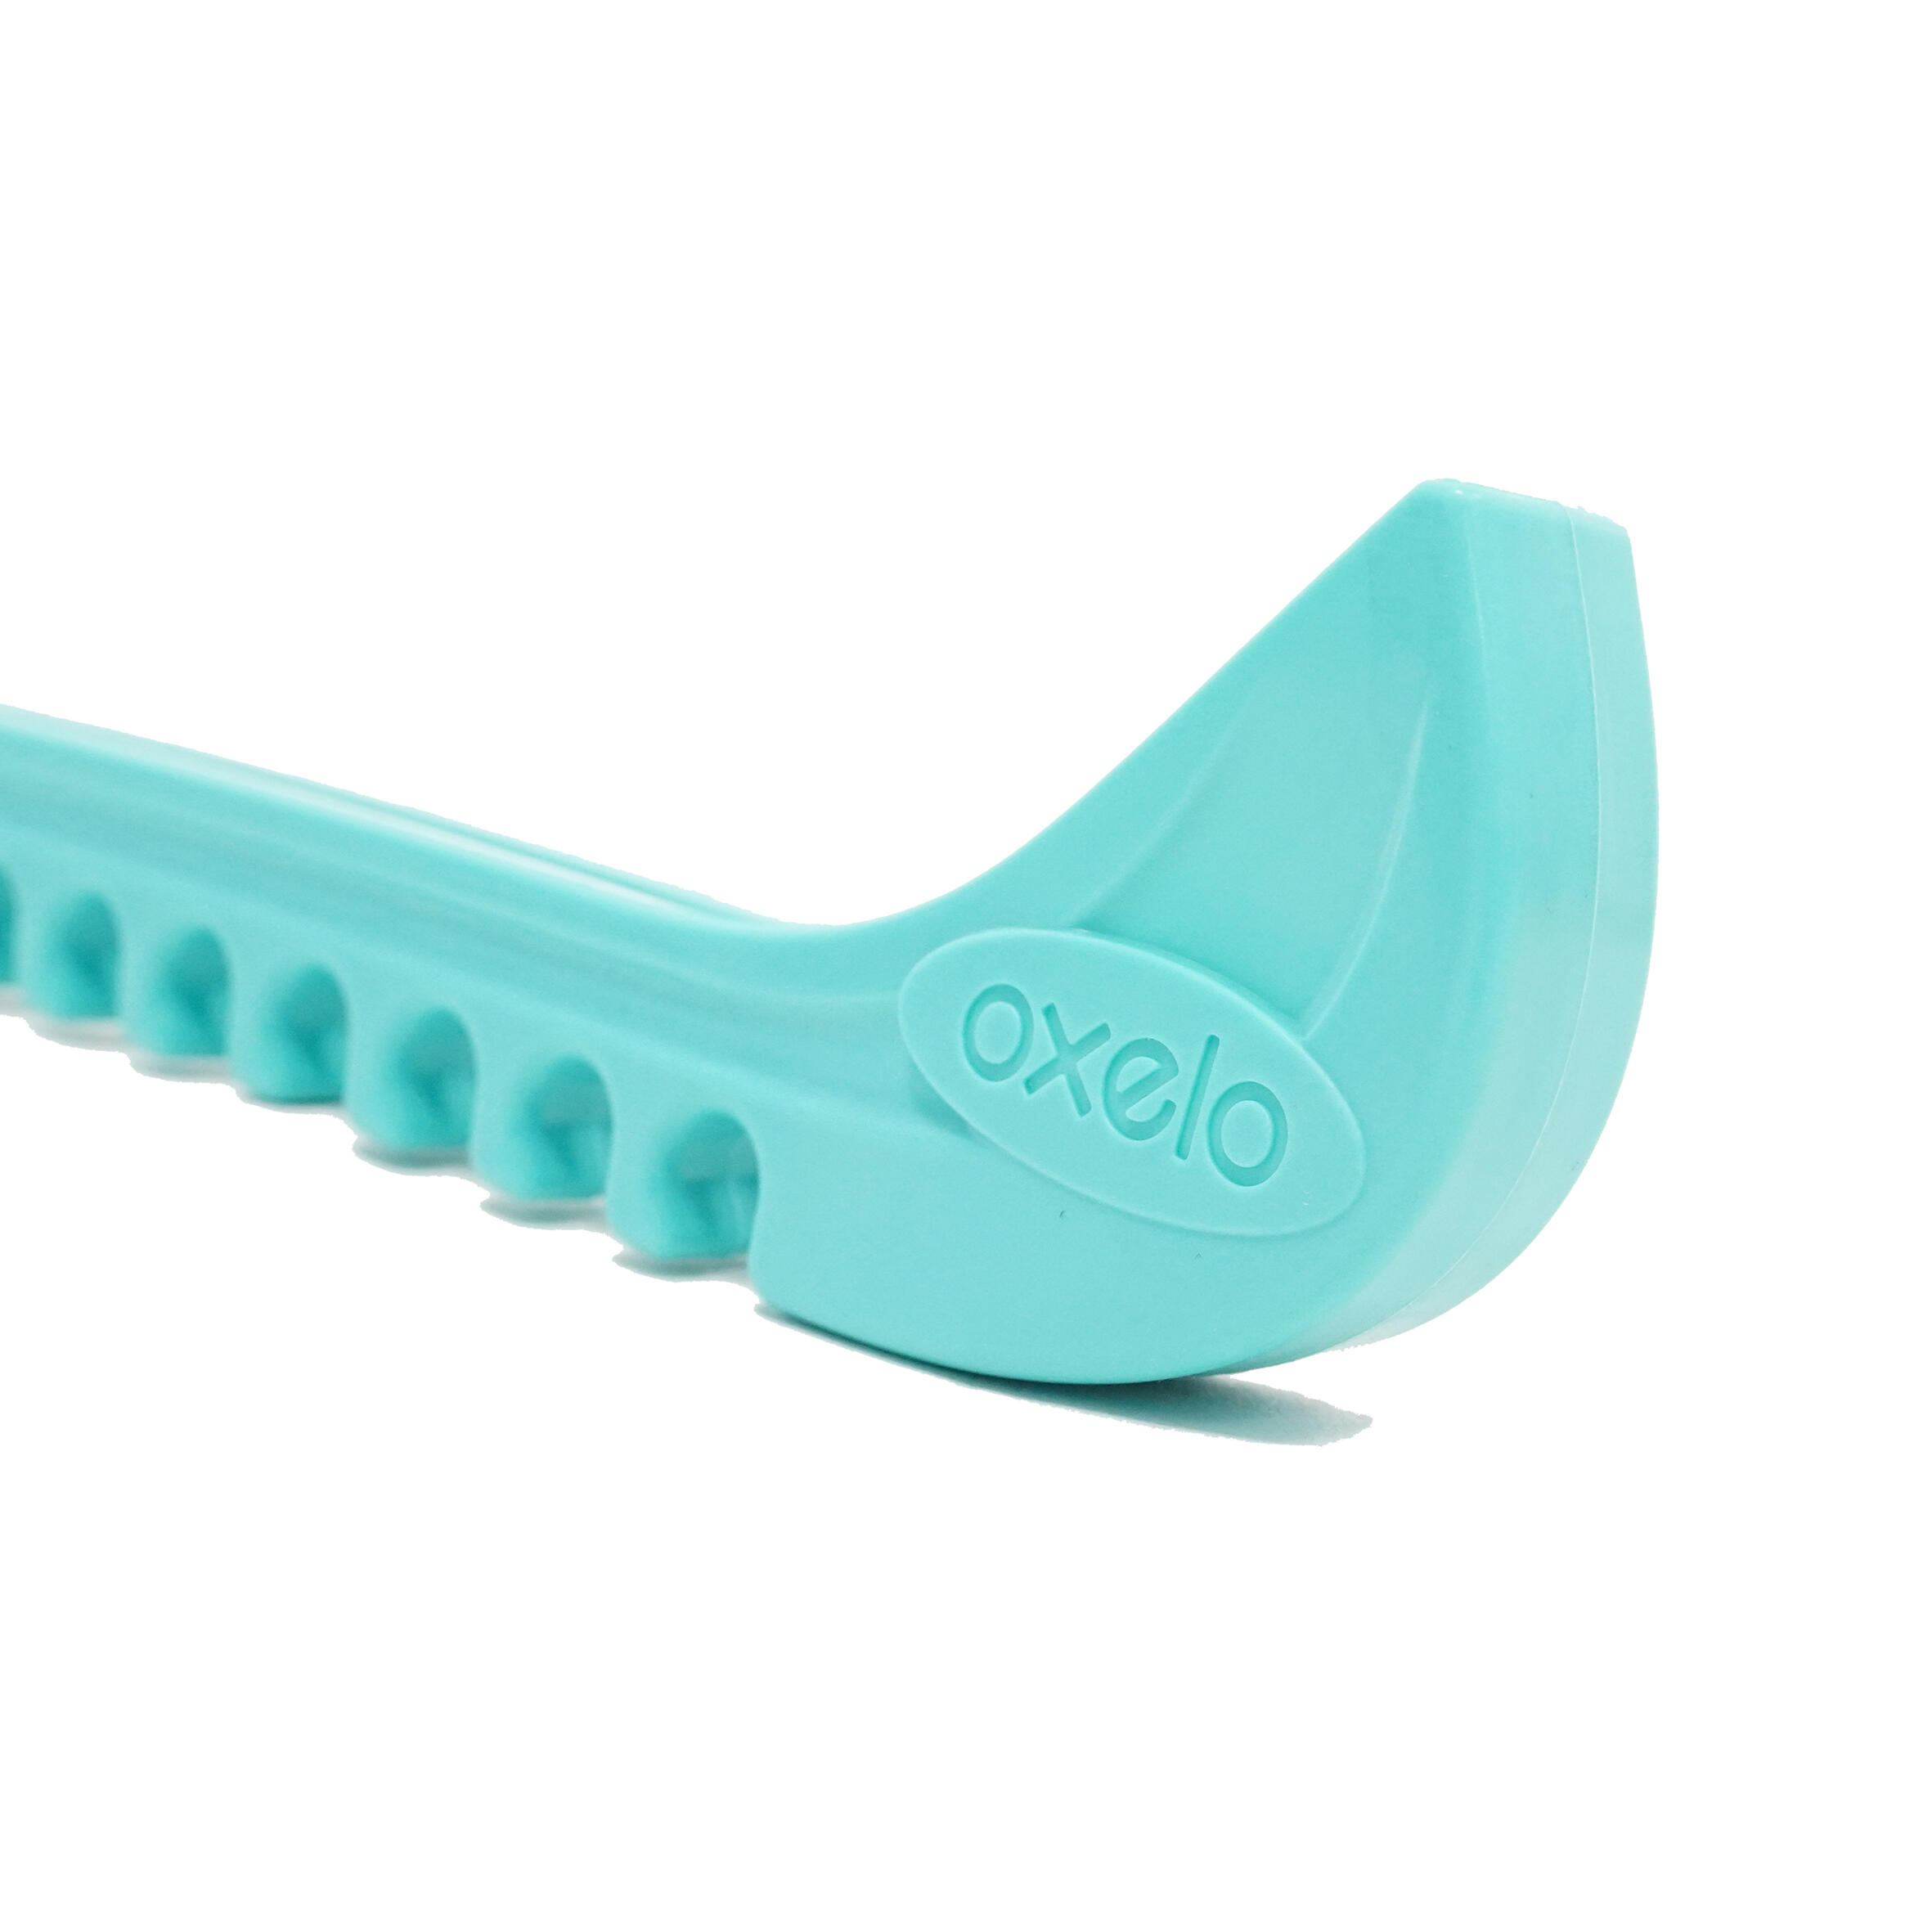 Basic Blade Cover - Turquoise 4/5